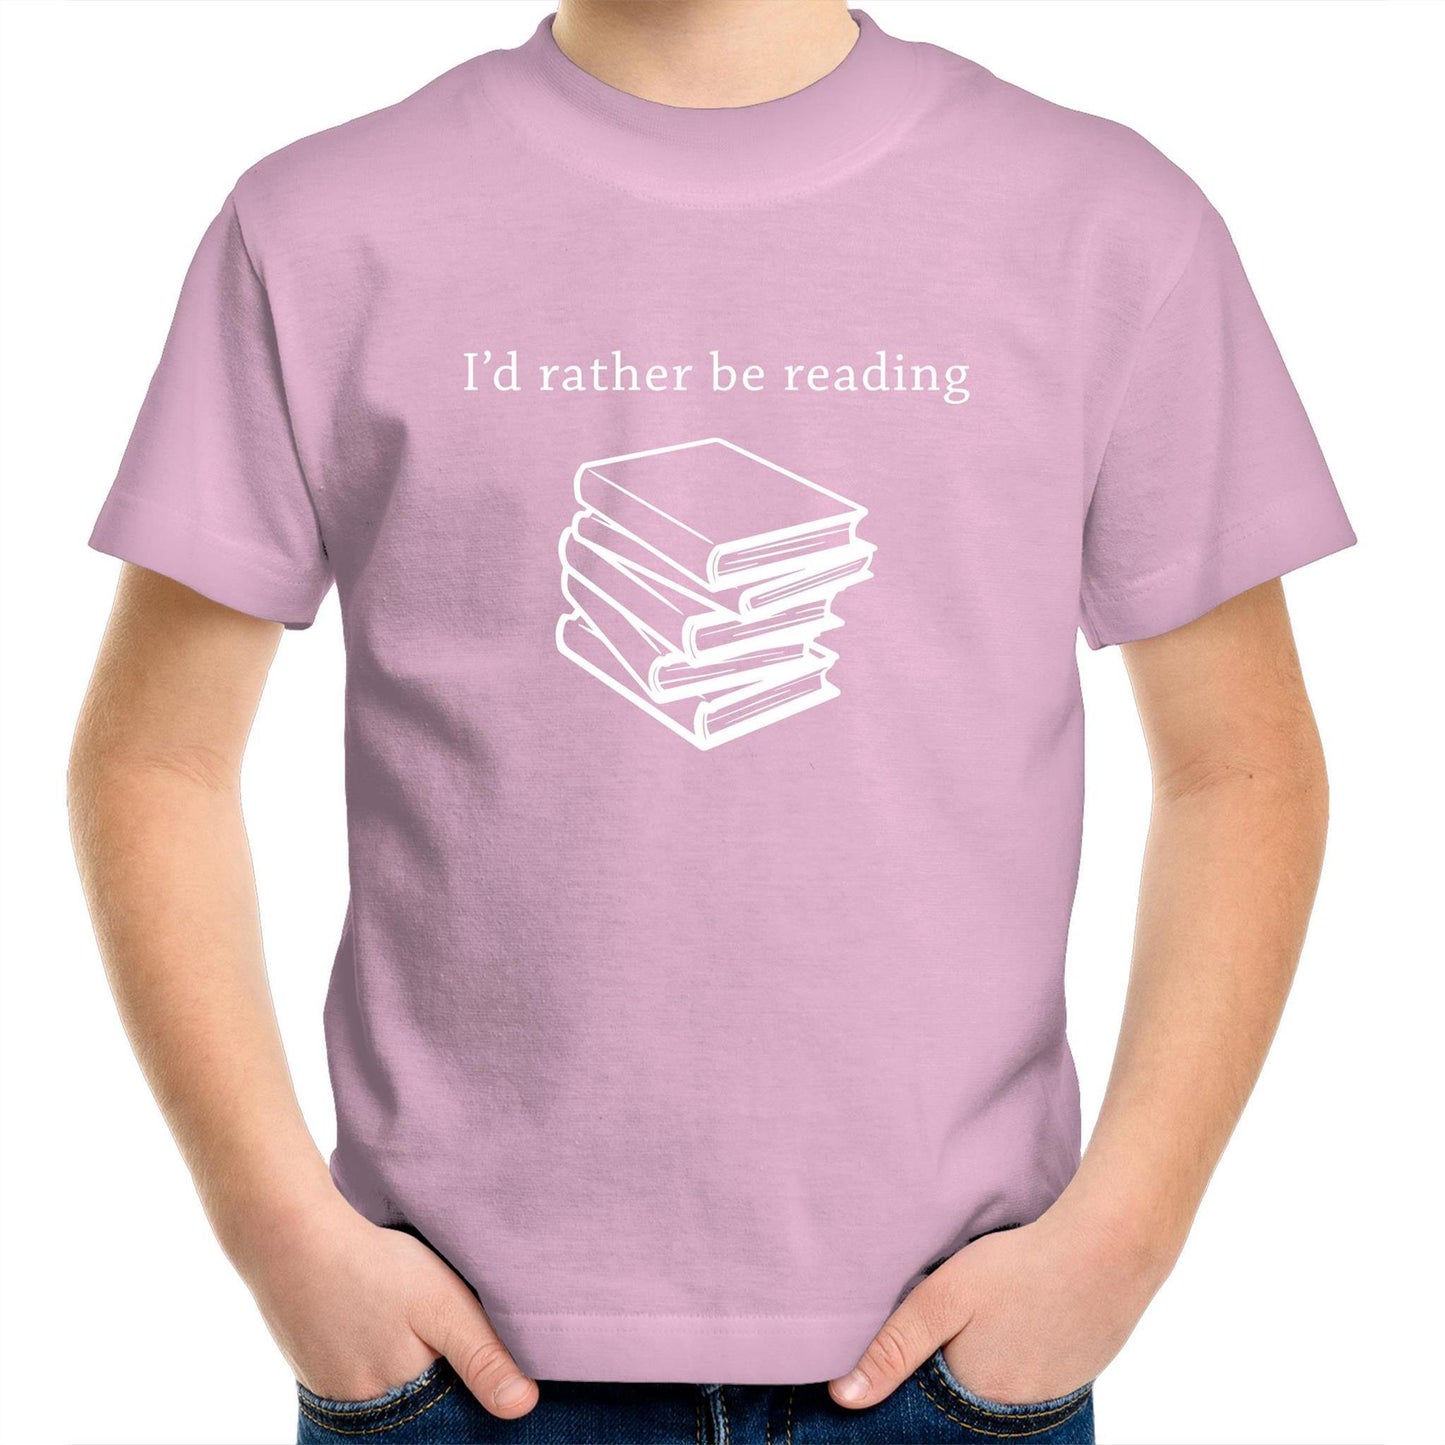 I'd Rather Be Reading - Kids Youth Crew T-Shirt Pink Kids Youth T-shirt Funny